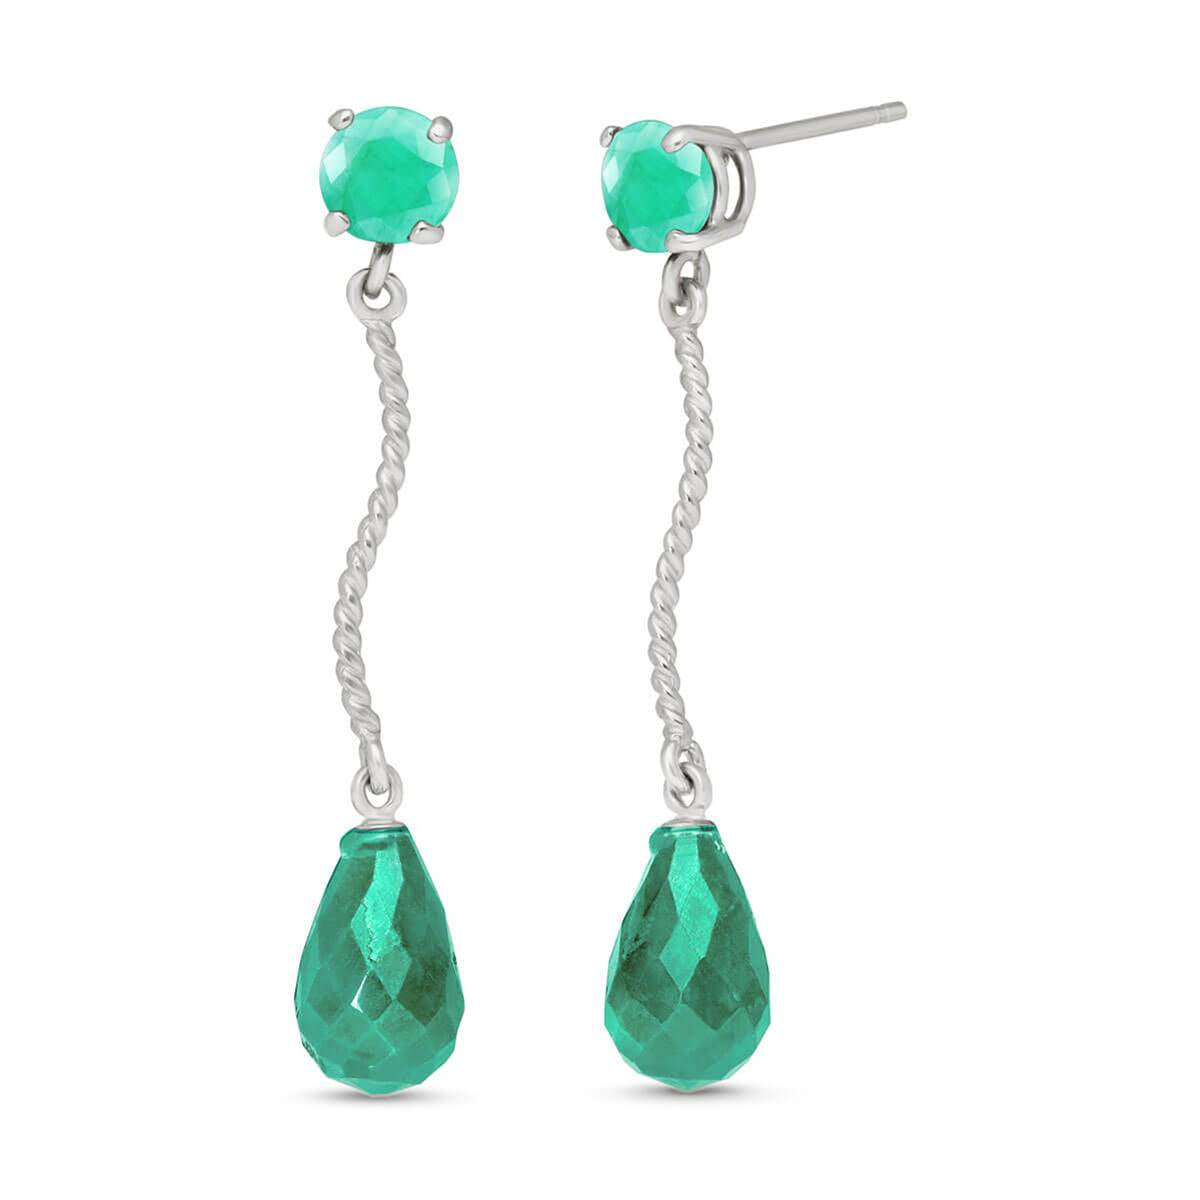 7.9 Carat 14K Solid White Gold Dangling Earrings Natural Emerald